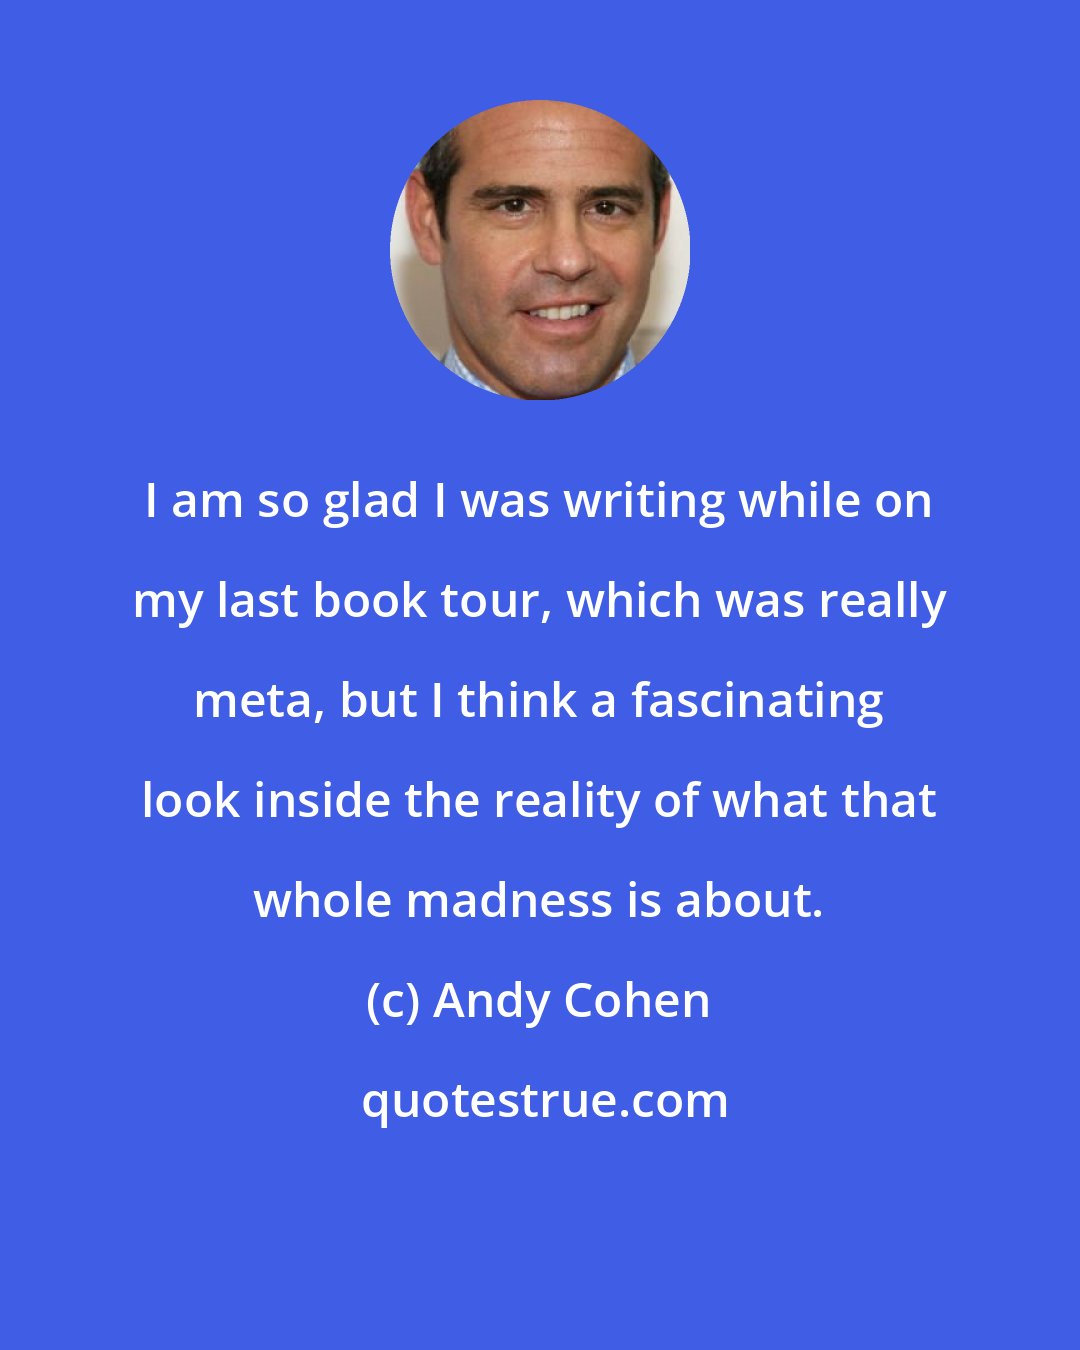 Andy Cohen: I am so glad I was writing while on my last book tour, which was really meta, but I think a fascinating look inside the reality of what that whole madness is about.